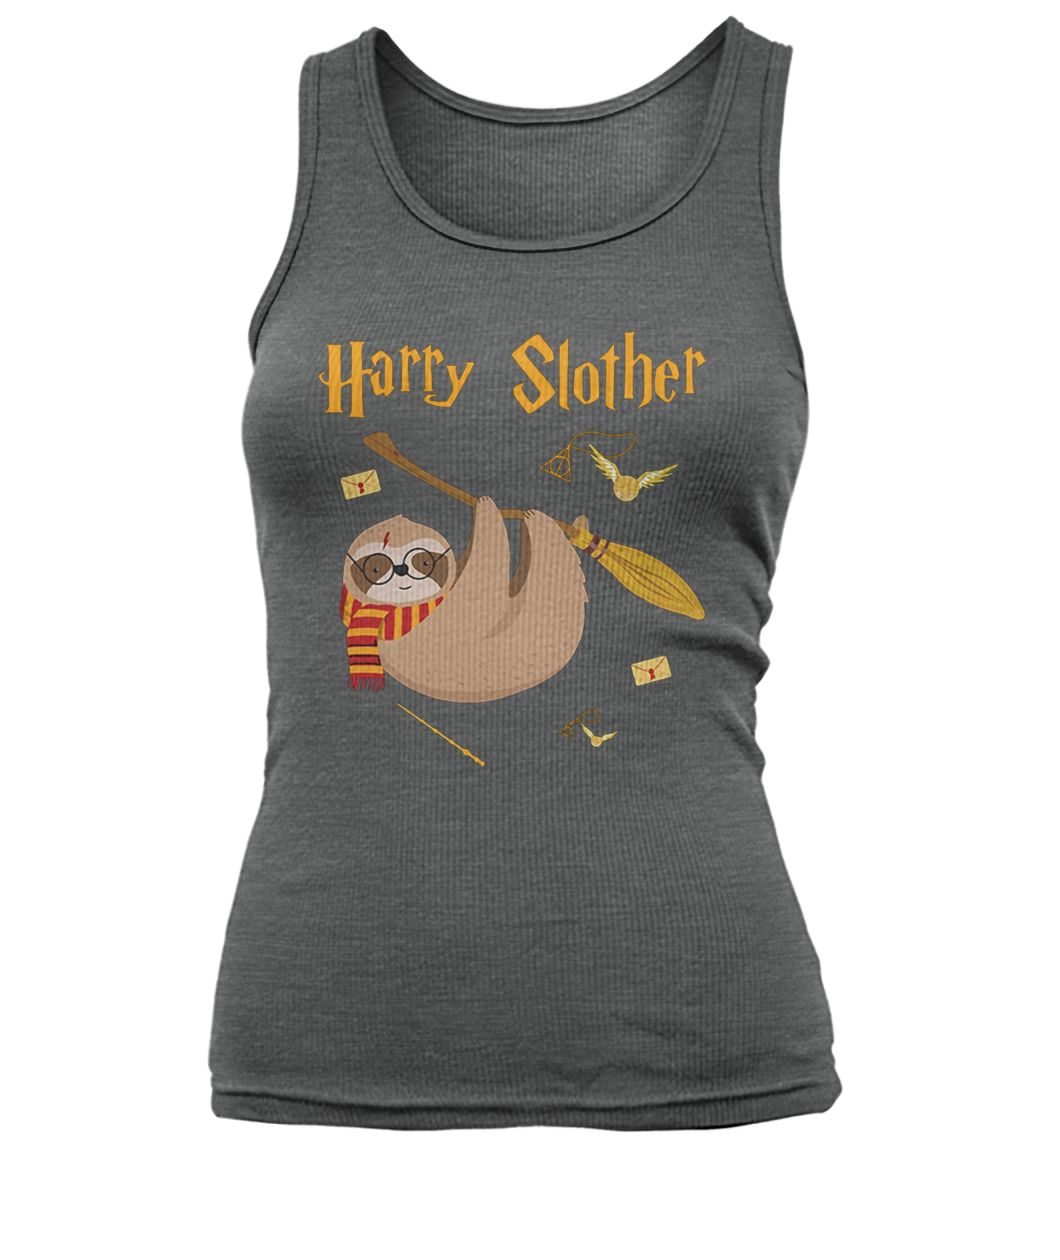 Harry potter sloth harry slother women's tank top